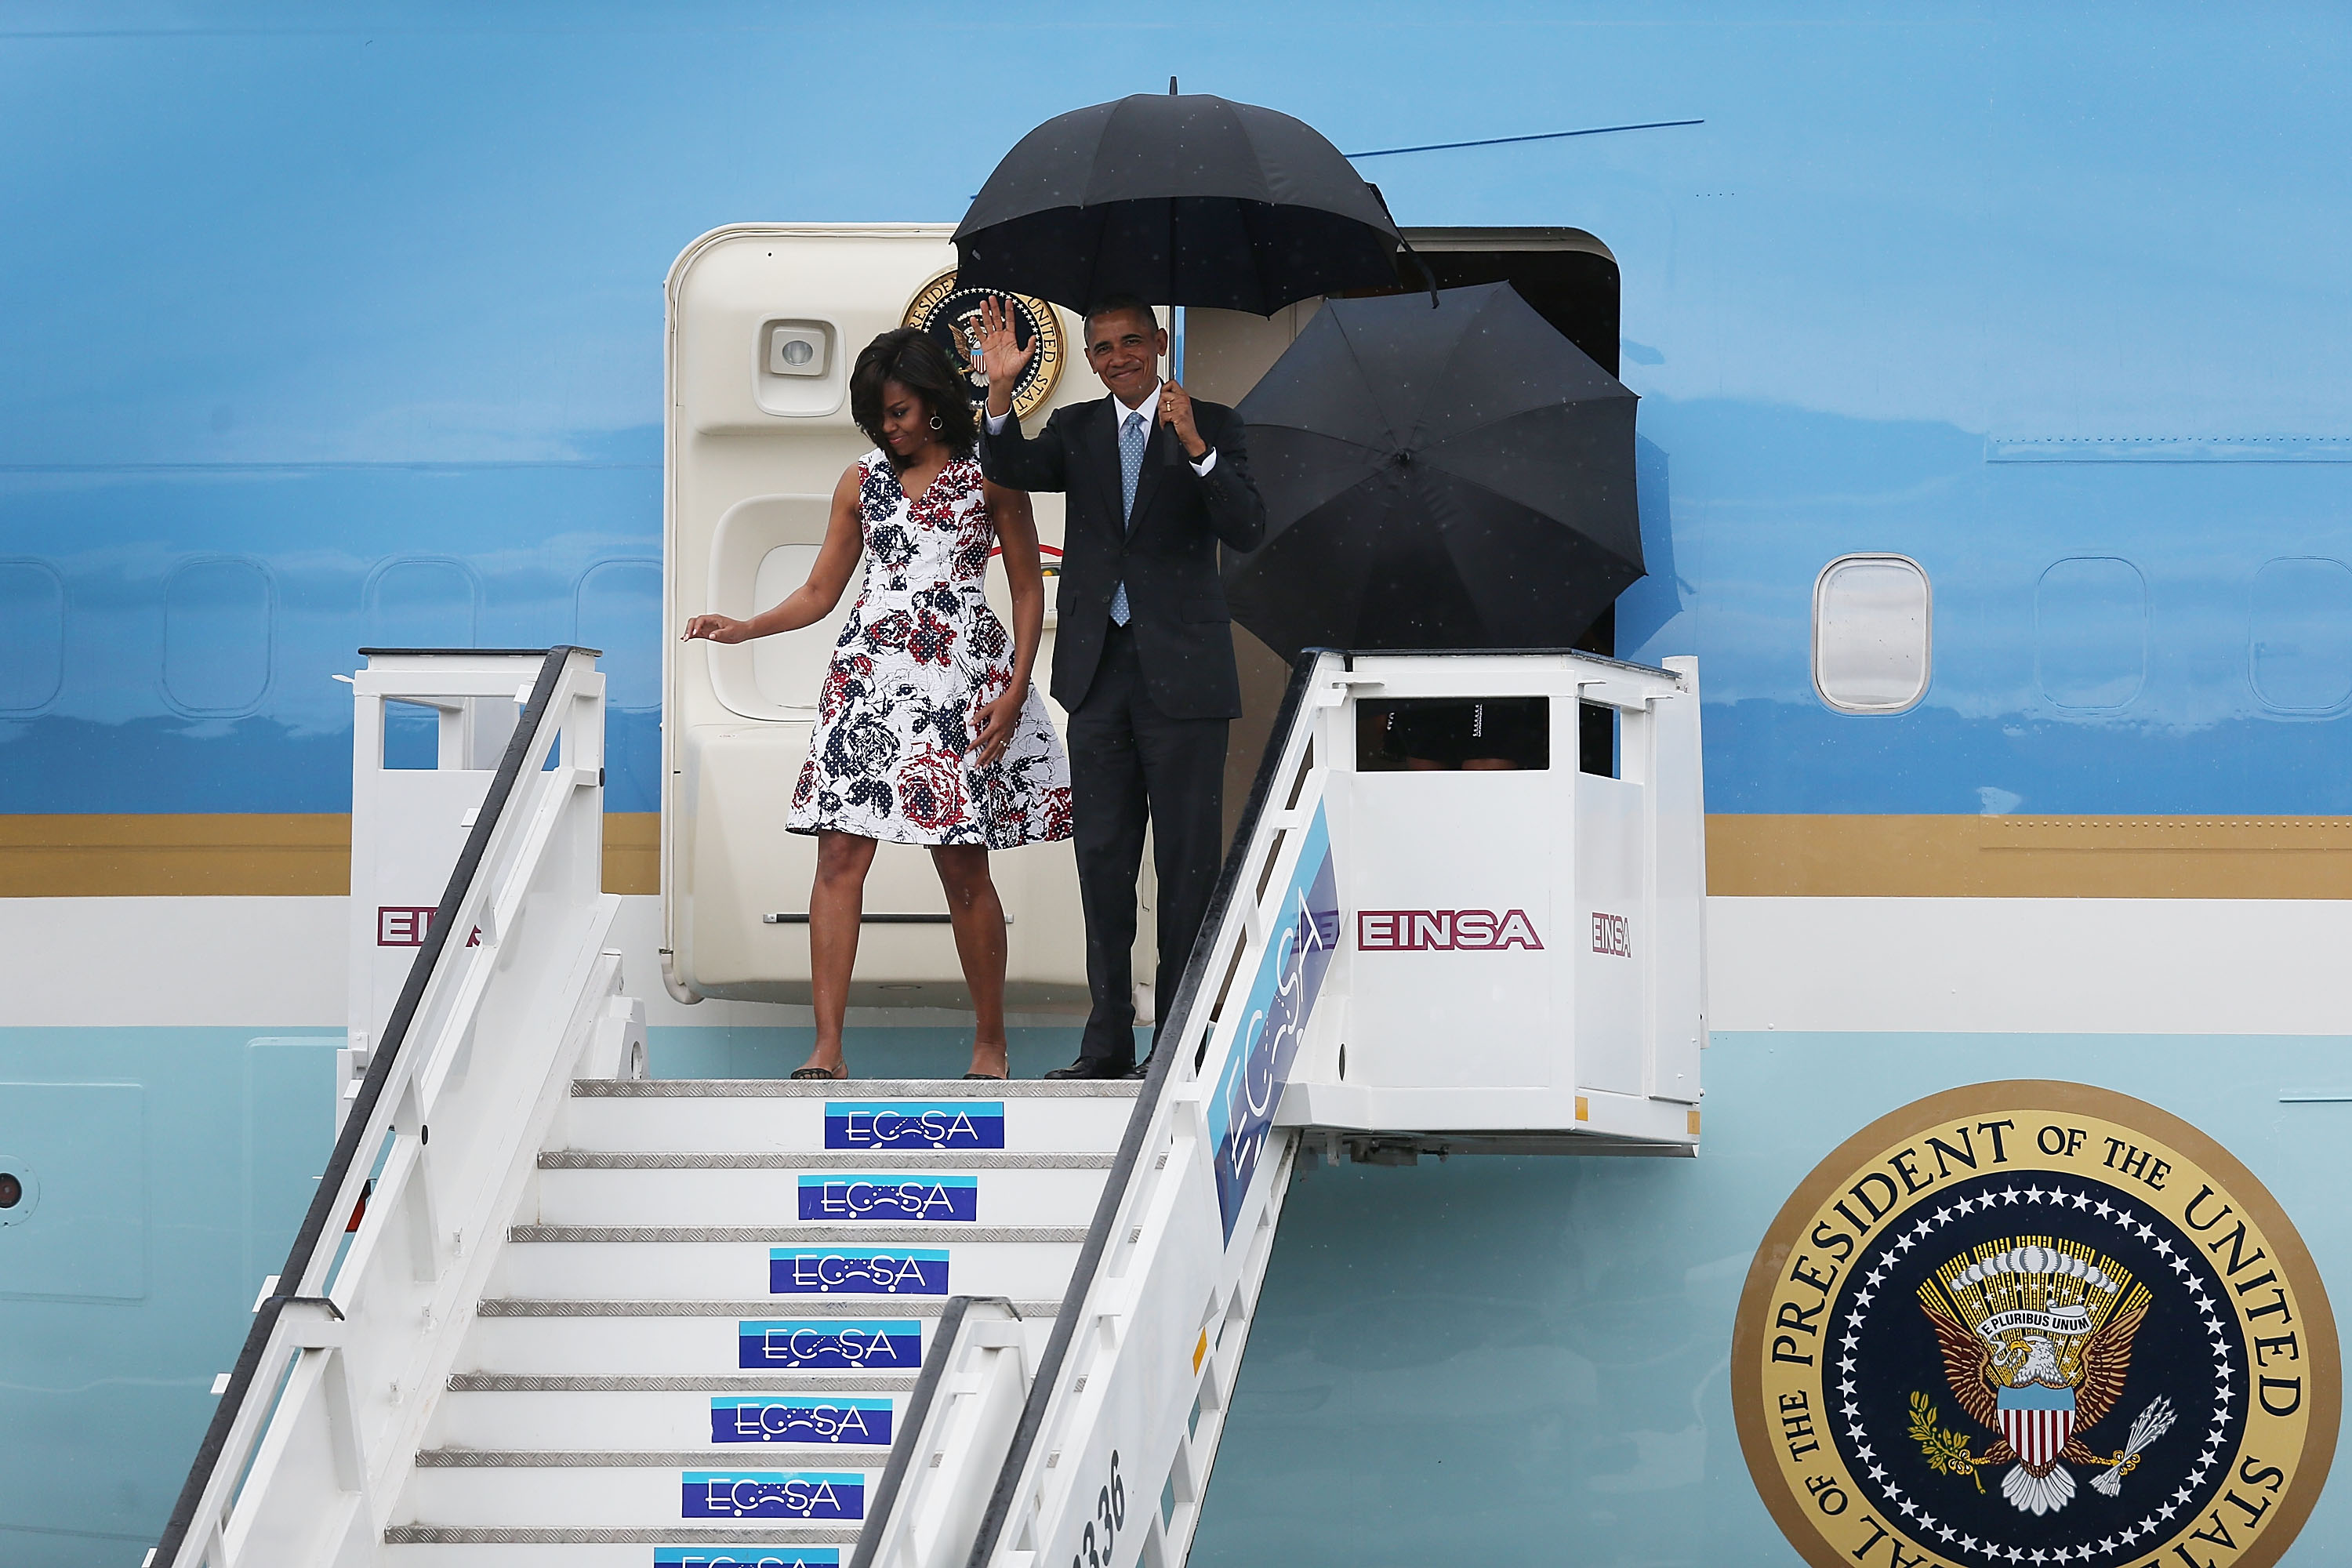 HAVANA, CUBA - MARCH 20:  U.S. President Barack Obama and Michelle Obama arrive at Jose Marti International Airport on Airforce One for a 48-hour visit on March 20, 2016 in Havana, Cuba.   Mr. Obama's visit is the first in nearly 90 years for a sitting president, the last one being Calvin Coolidge.  (Photo by Joe Raedle/Getty Images)